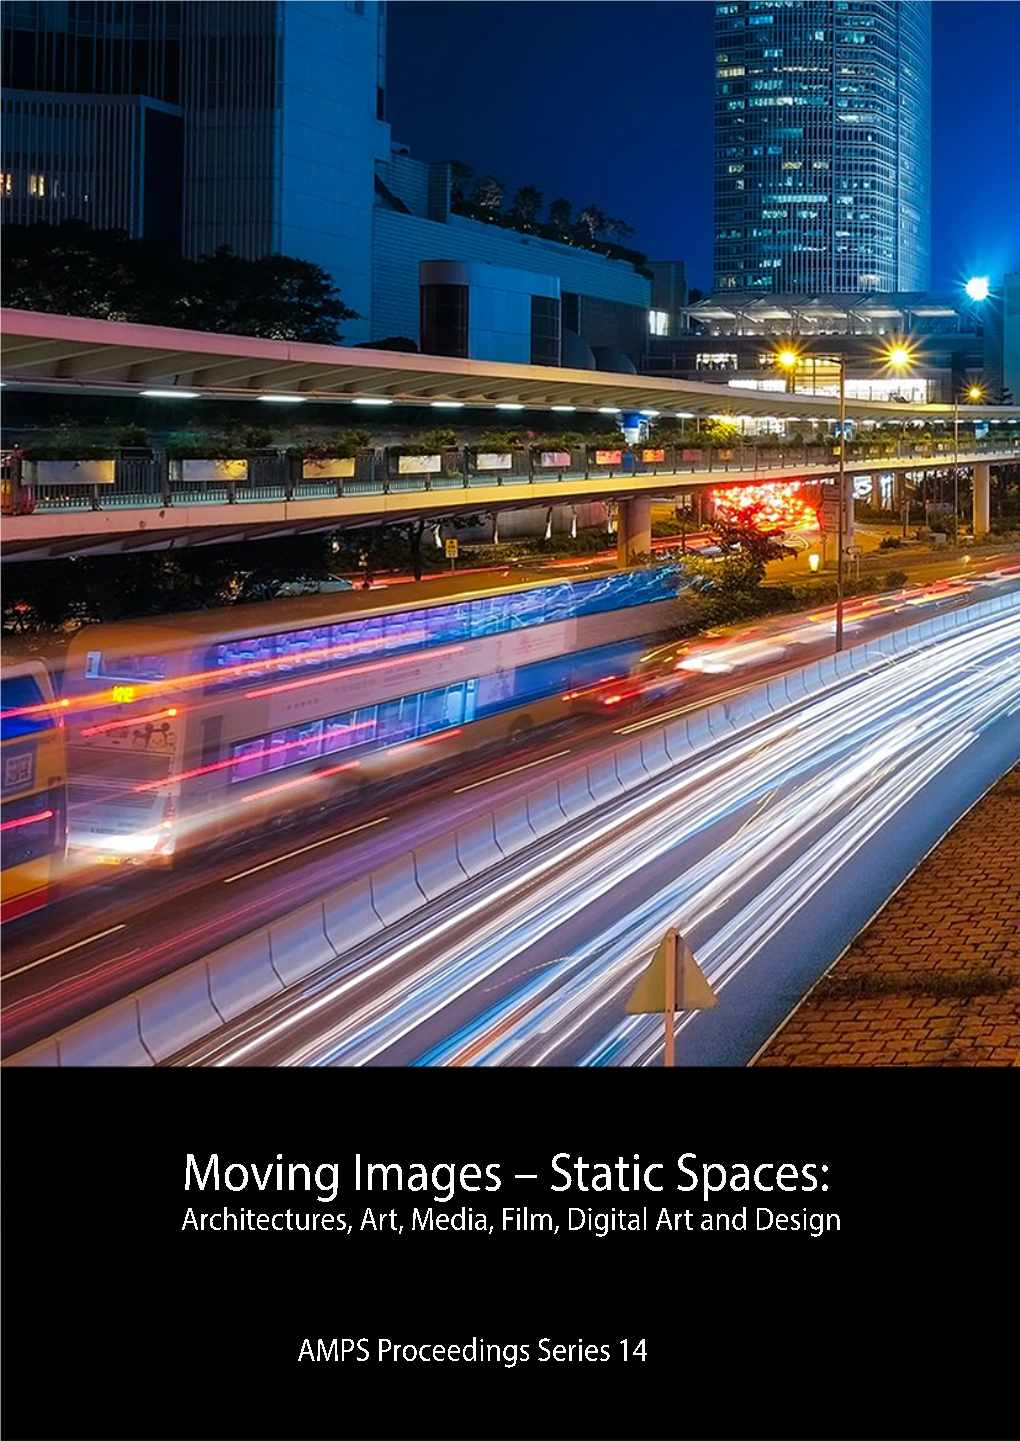 Moving Images – Static Spaces: Architectures, Art, Media, Film, Digital Art and Design